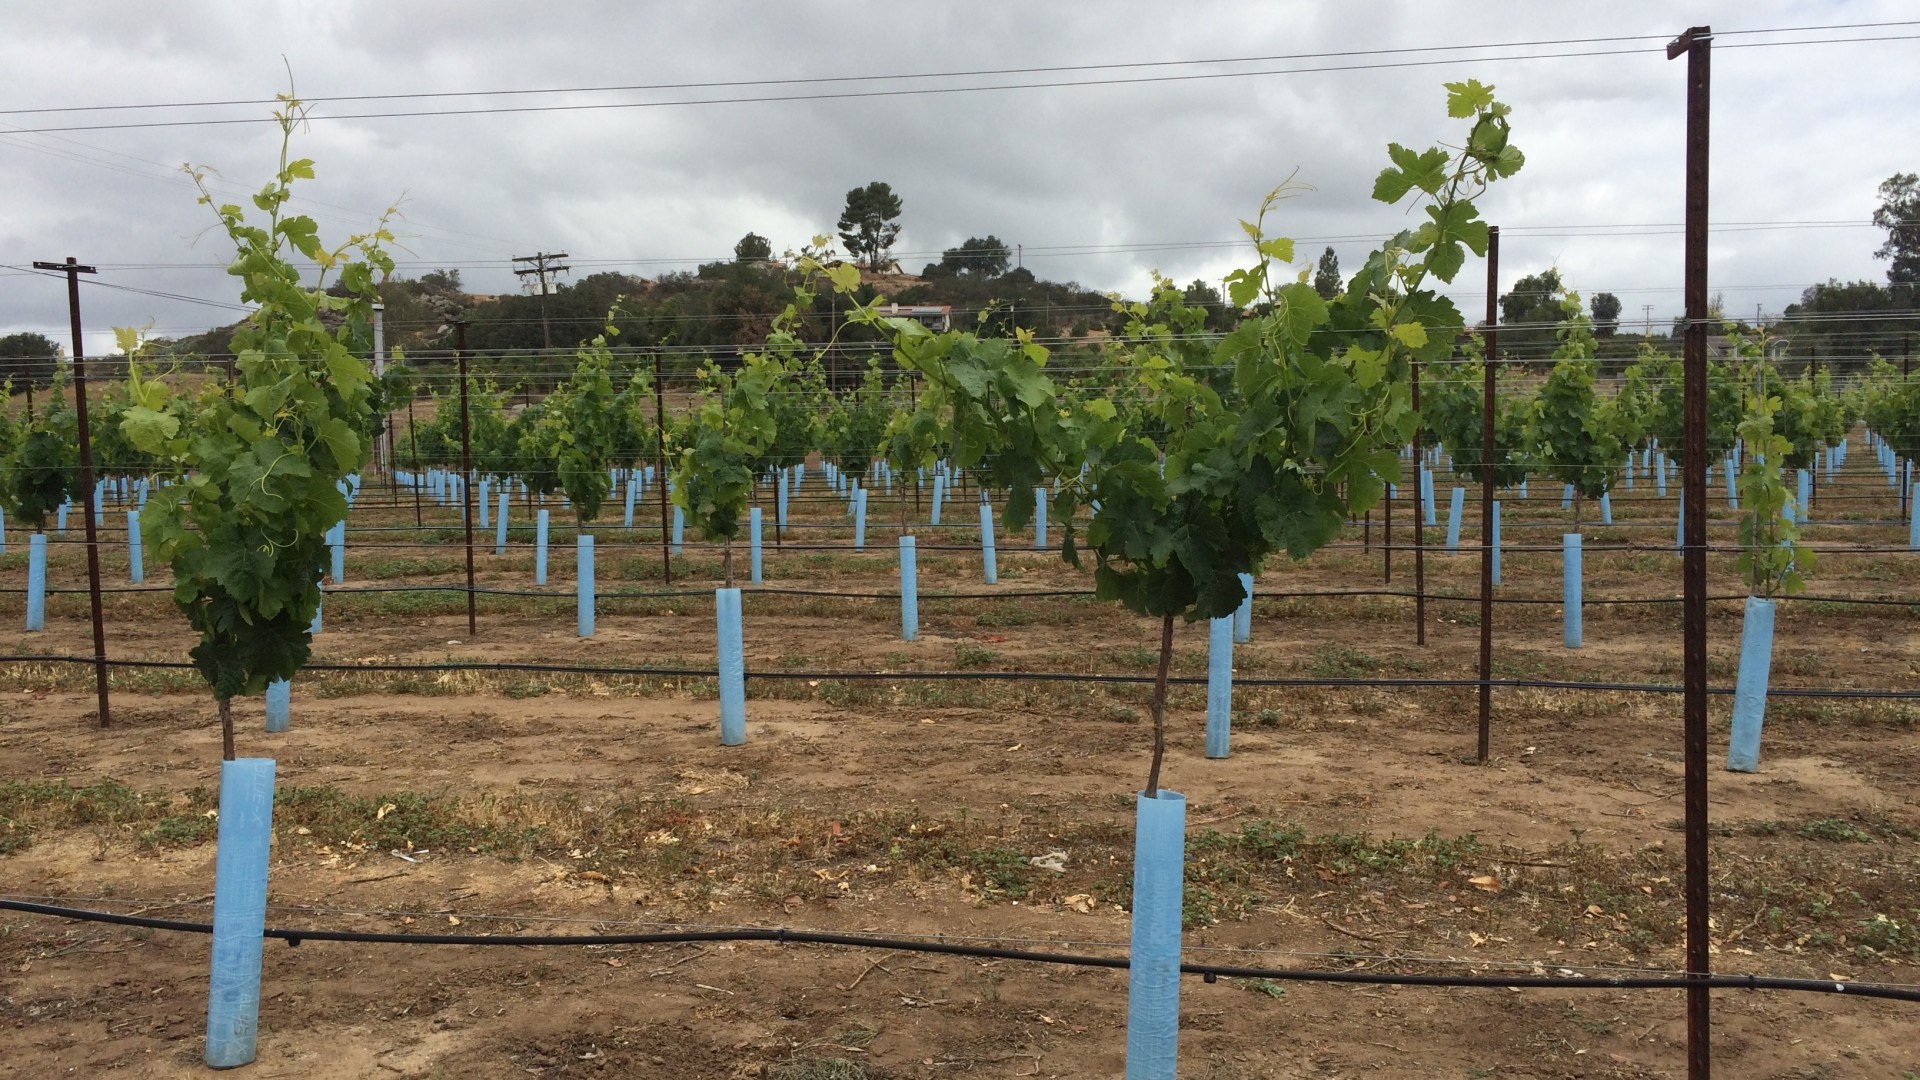 The price of water in San Diego County has more than doubled lately. But vineyards require 25 percent less water than citrus. As a result, the number of wineries in the county has tripled in recent years.